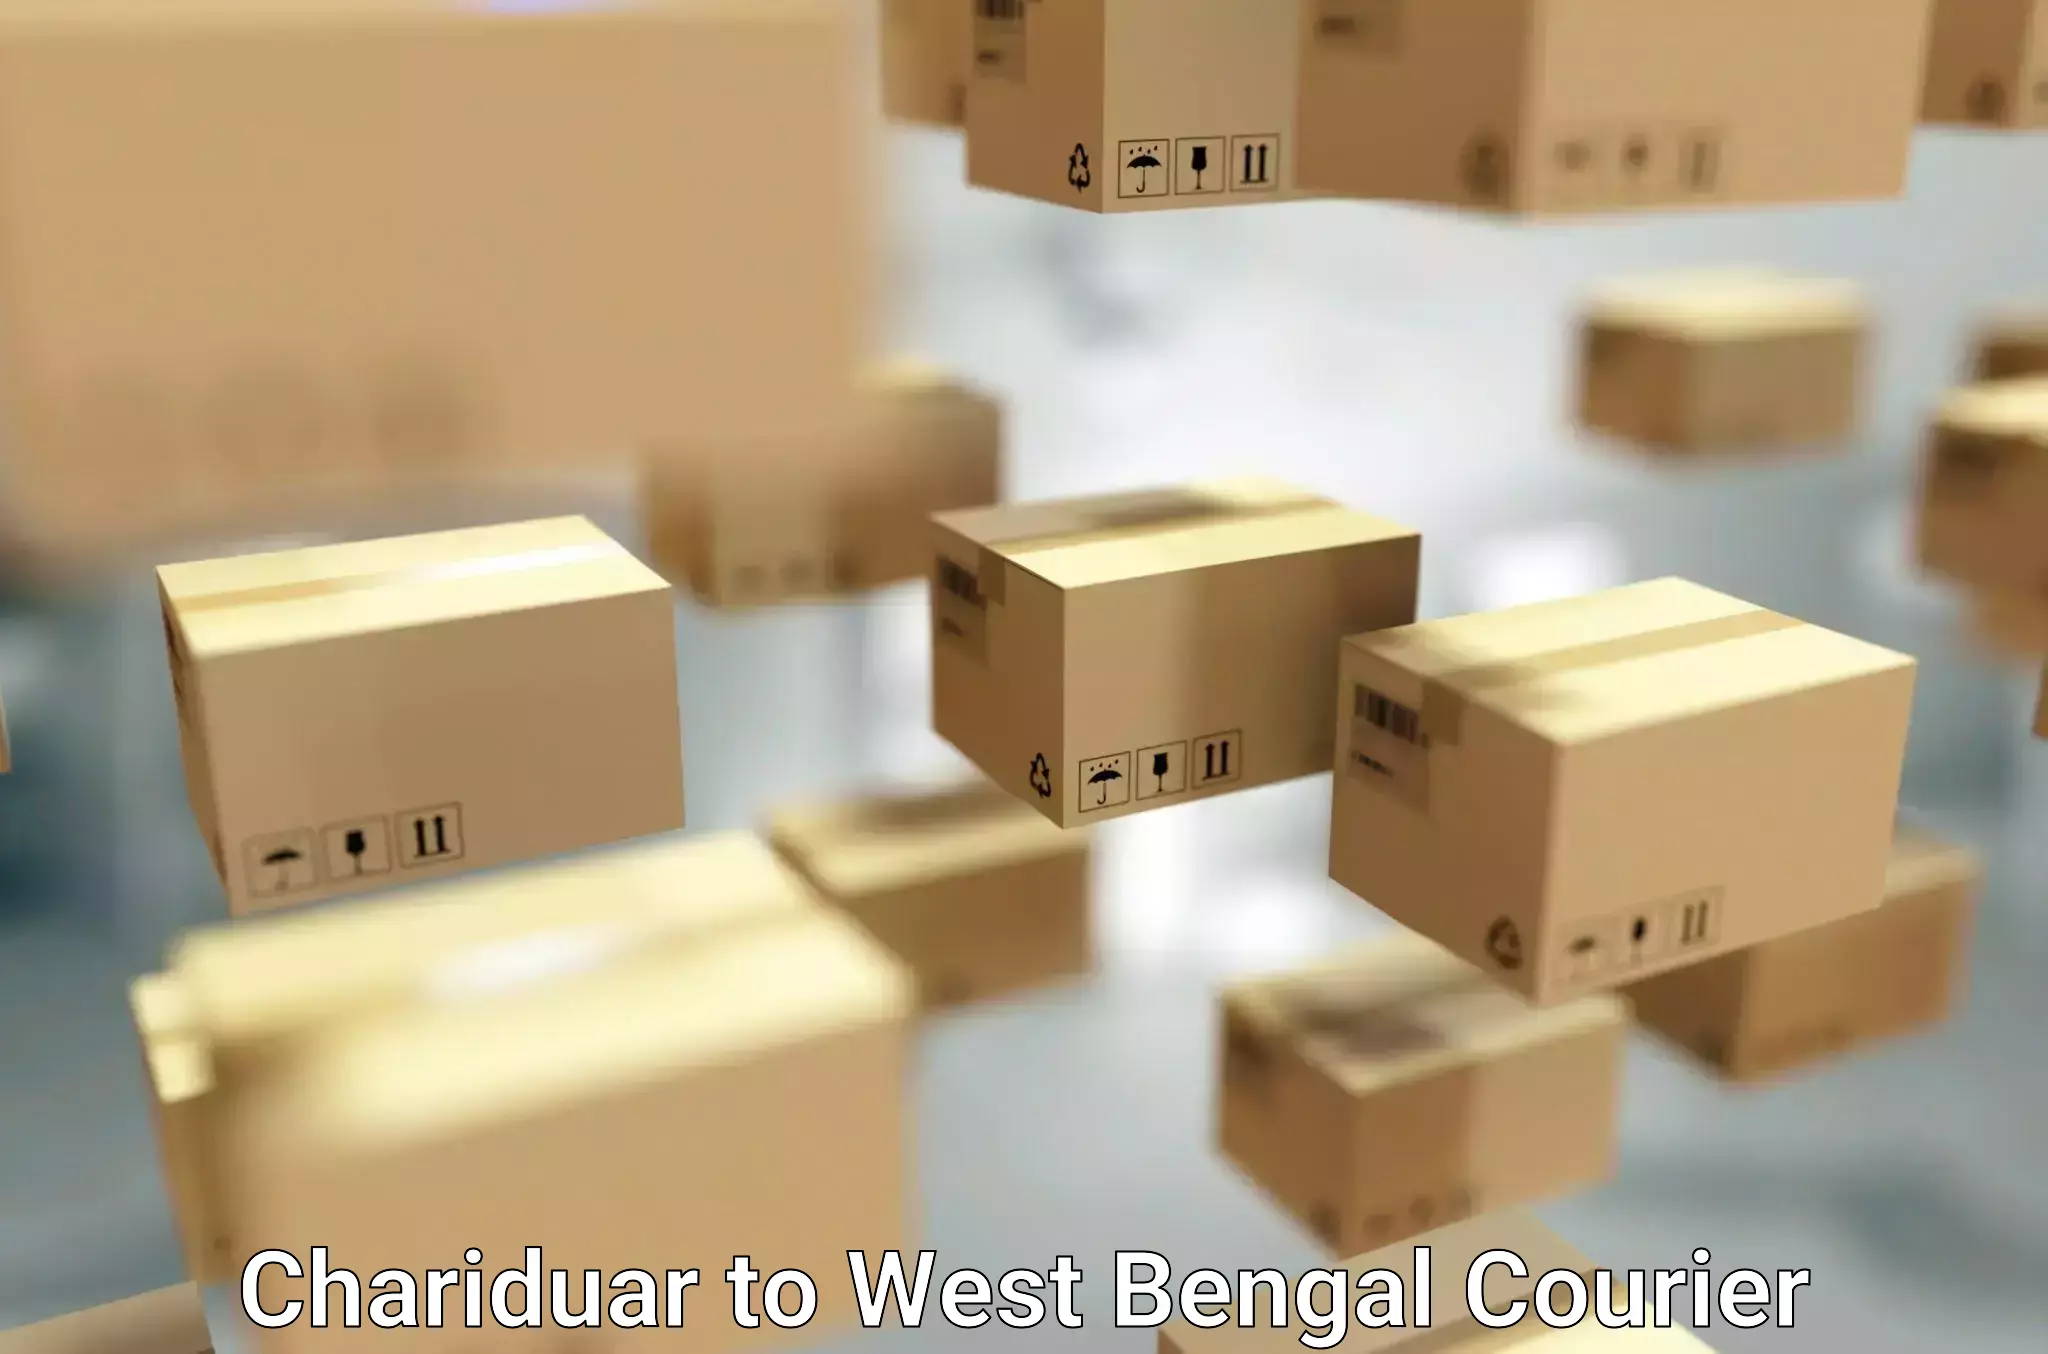 Furniture delivery service Chariduar to West Bengal